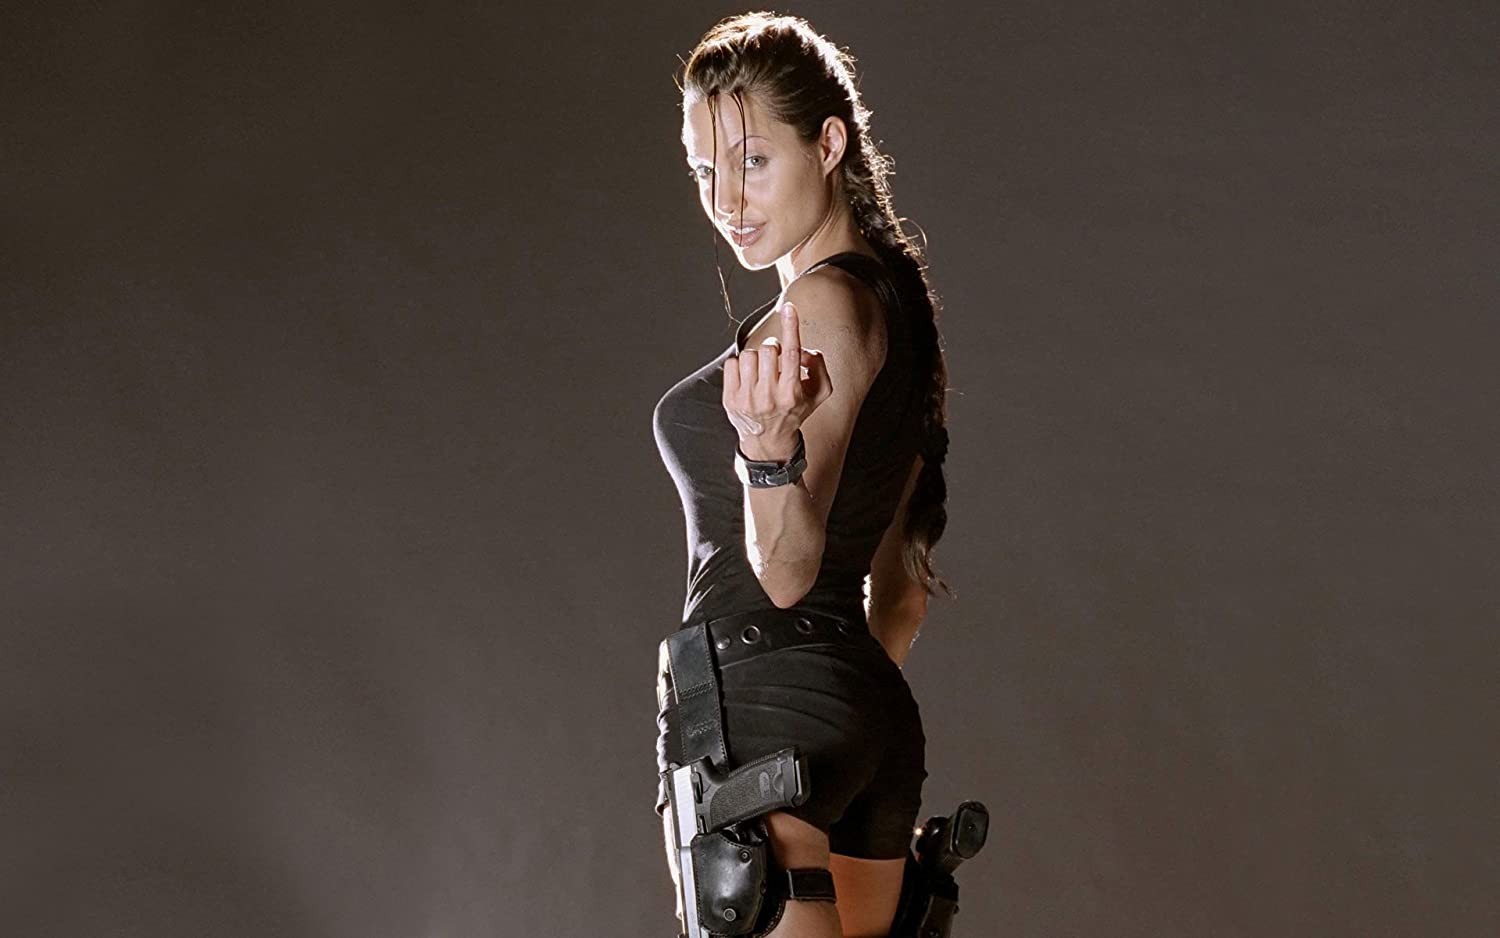 Angelina Jolie for Tomb Raider 3 - twenty years after she brought Lara  Croft to life in the original Tomb Raider movie, Angelina Jolie returns to  action in Warner's “Those who wish